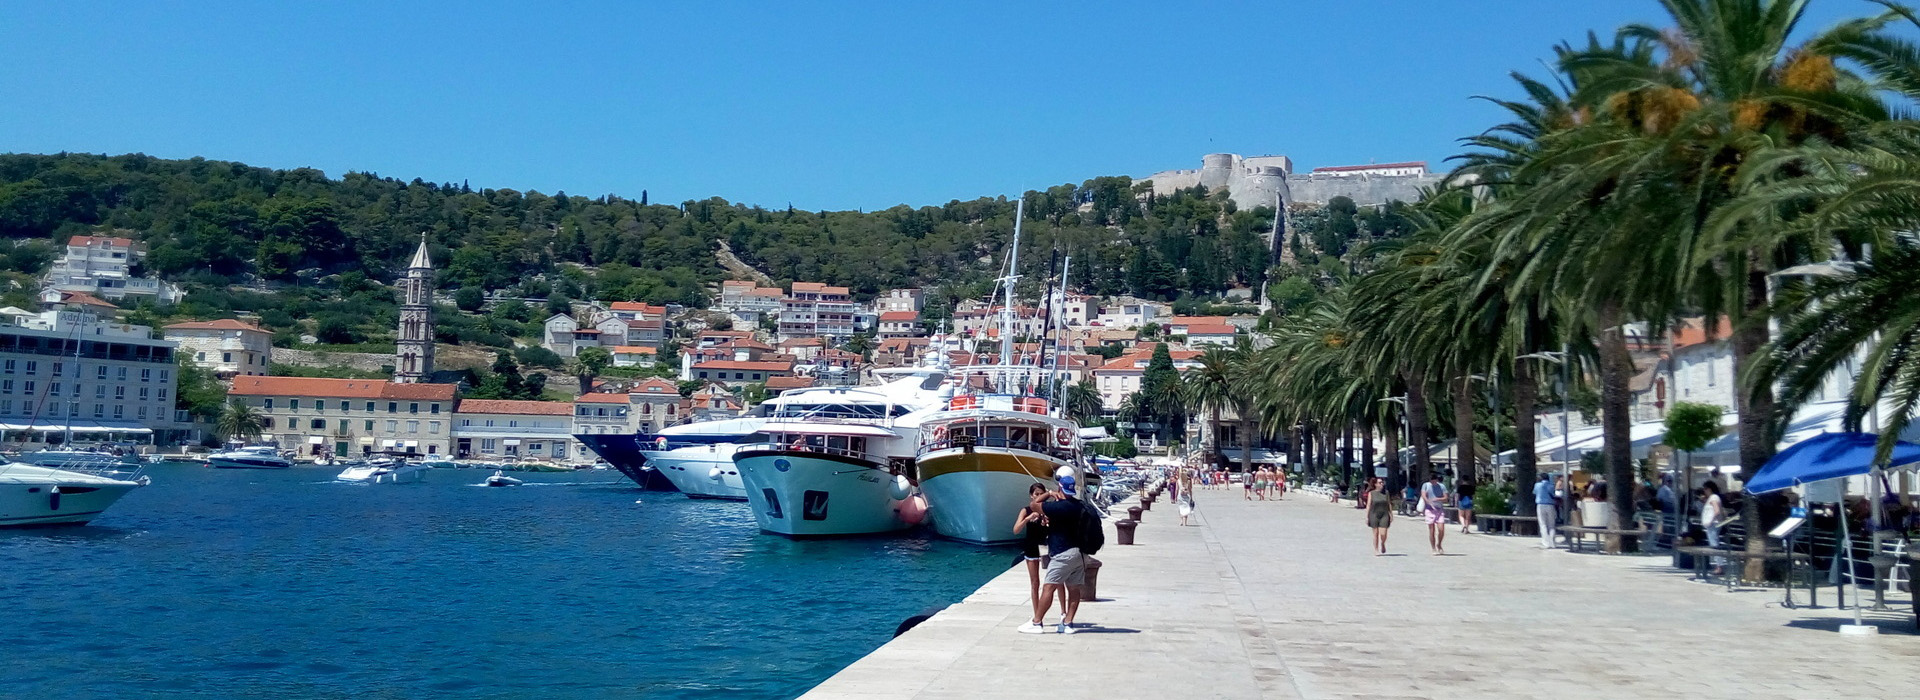 Cycling on the Dalmatian Coast guided holiday - Town of Hvar